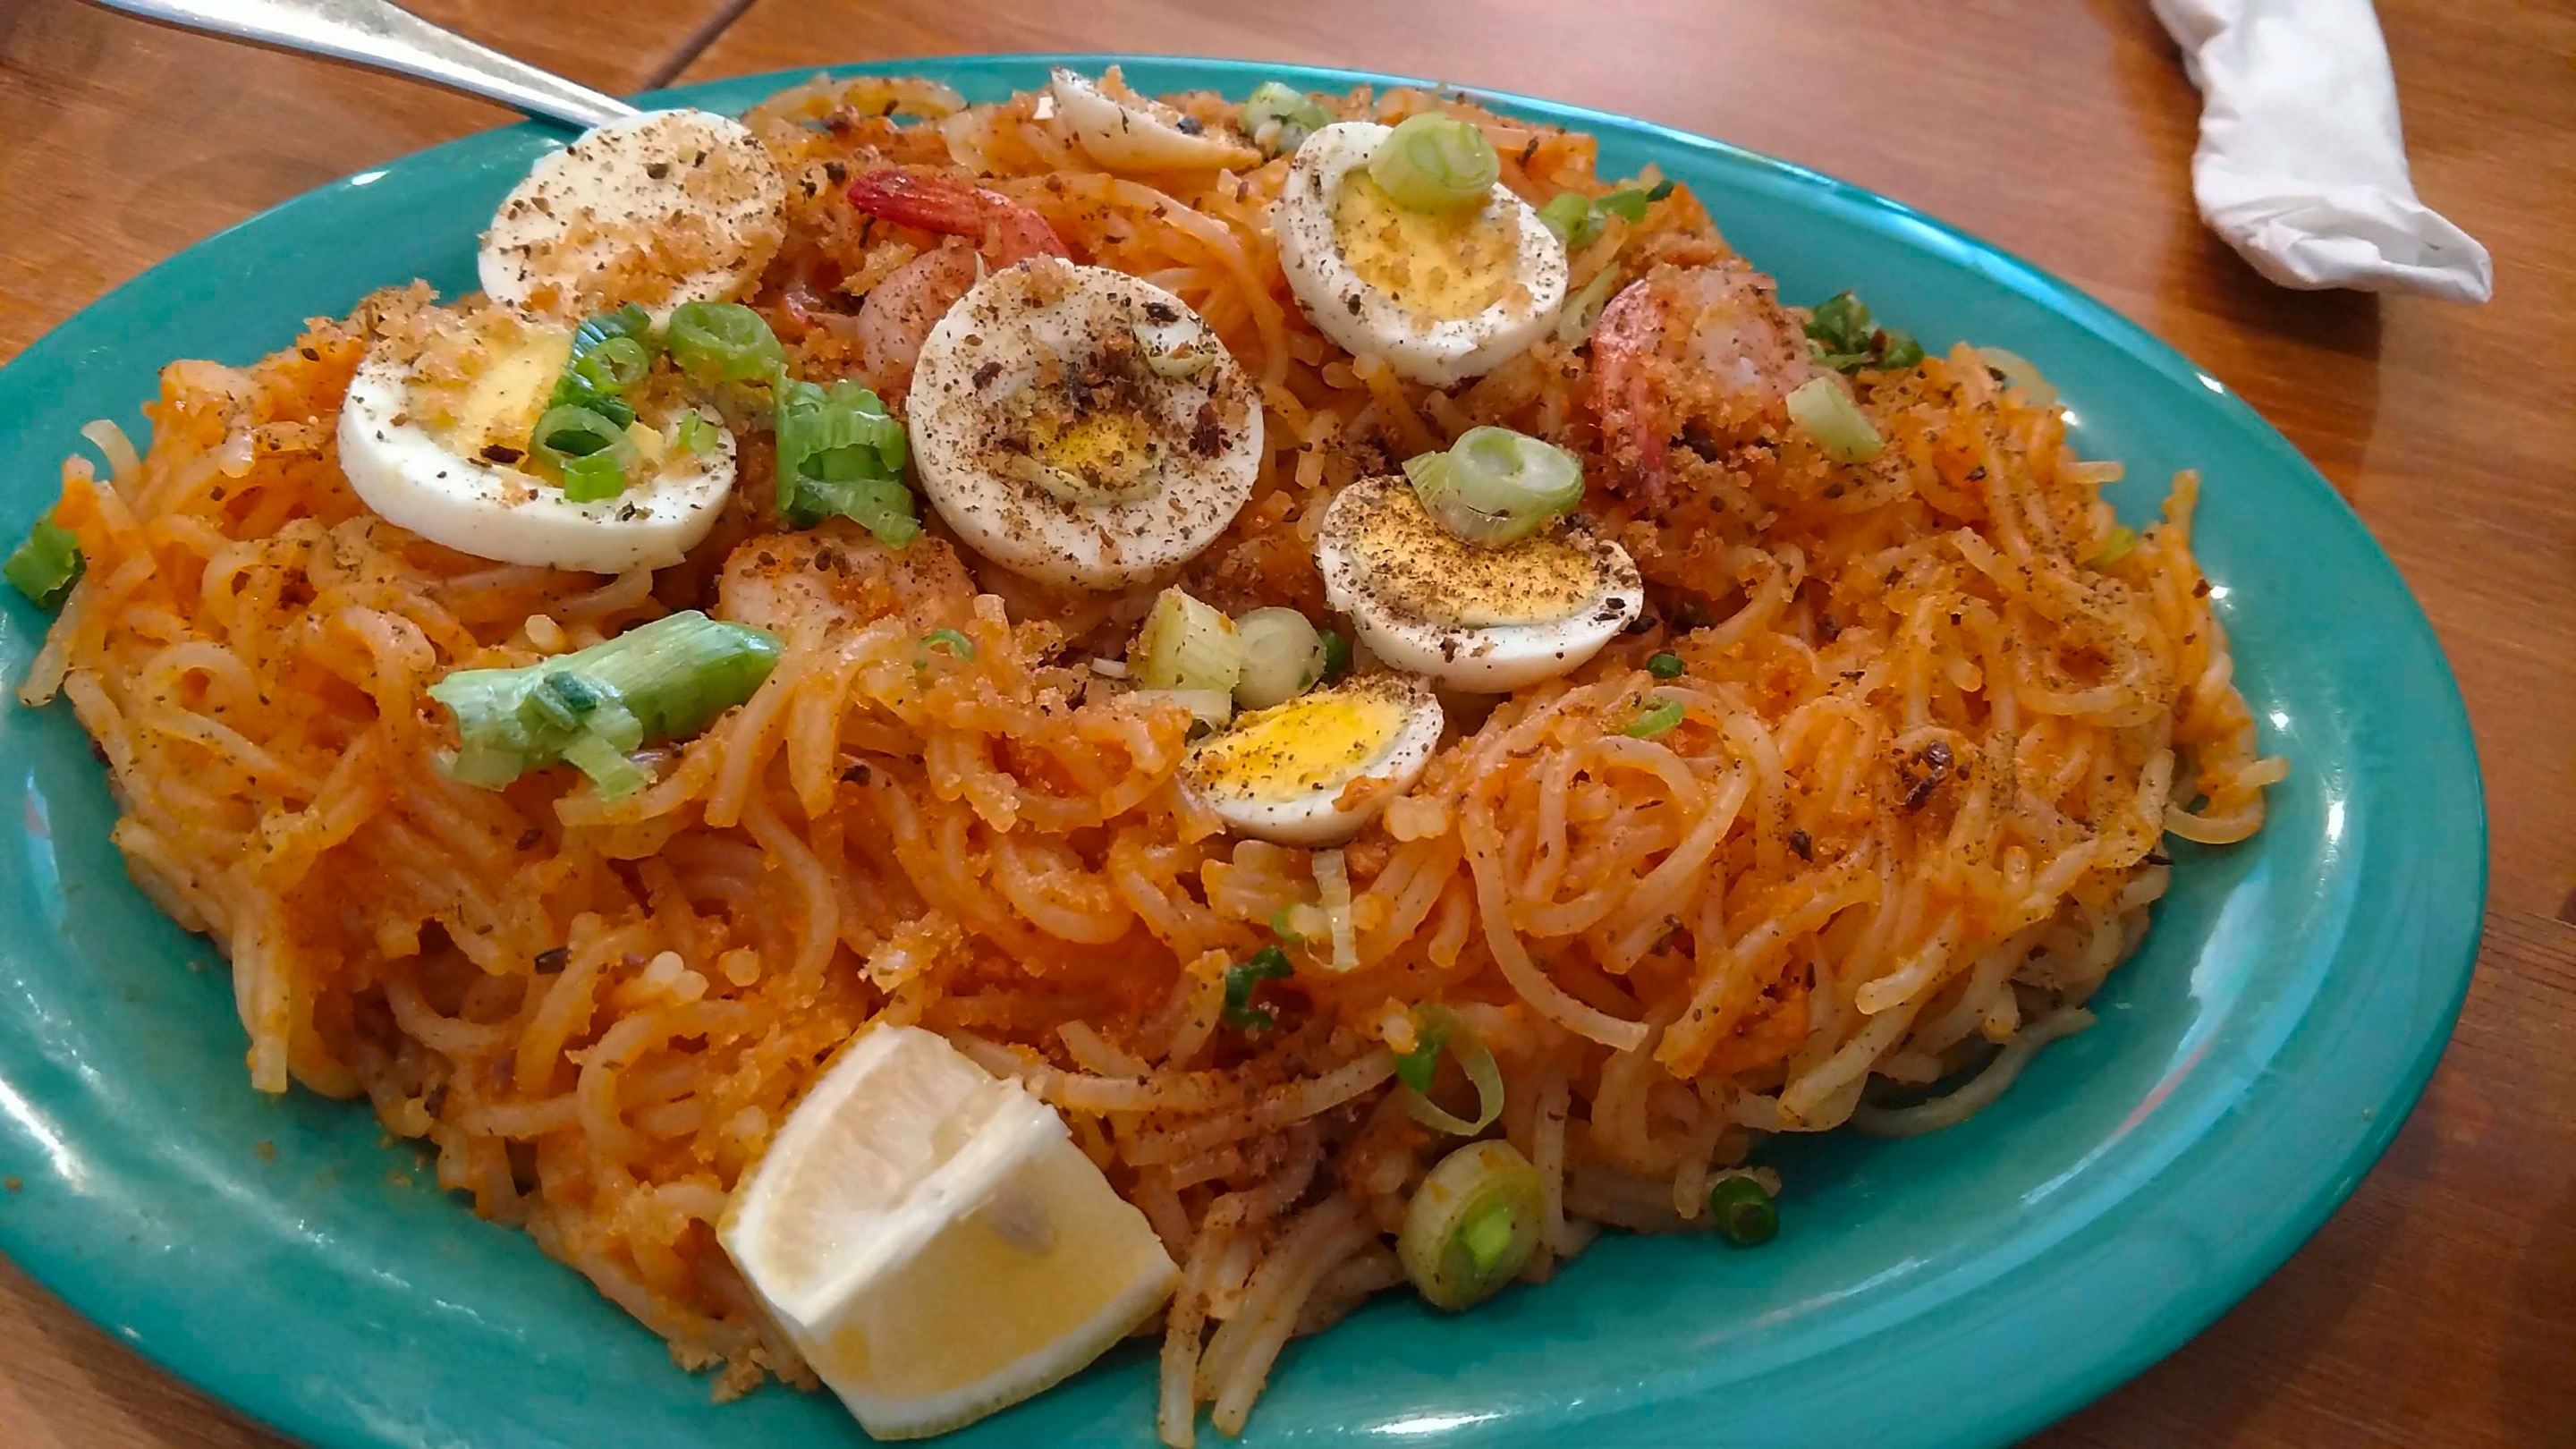 A large dish of spaghetti palabok topped with hard-boiled eggs, chicharon, and cooked shrimp